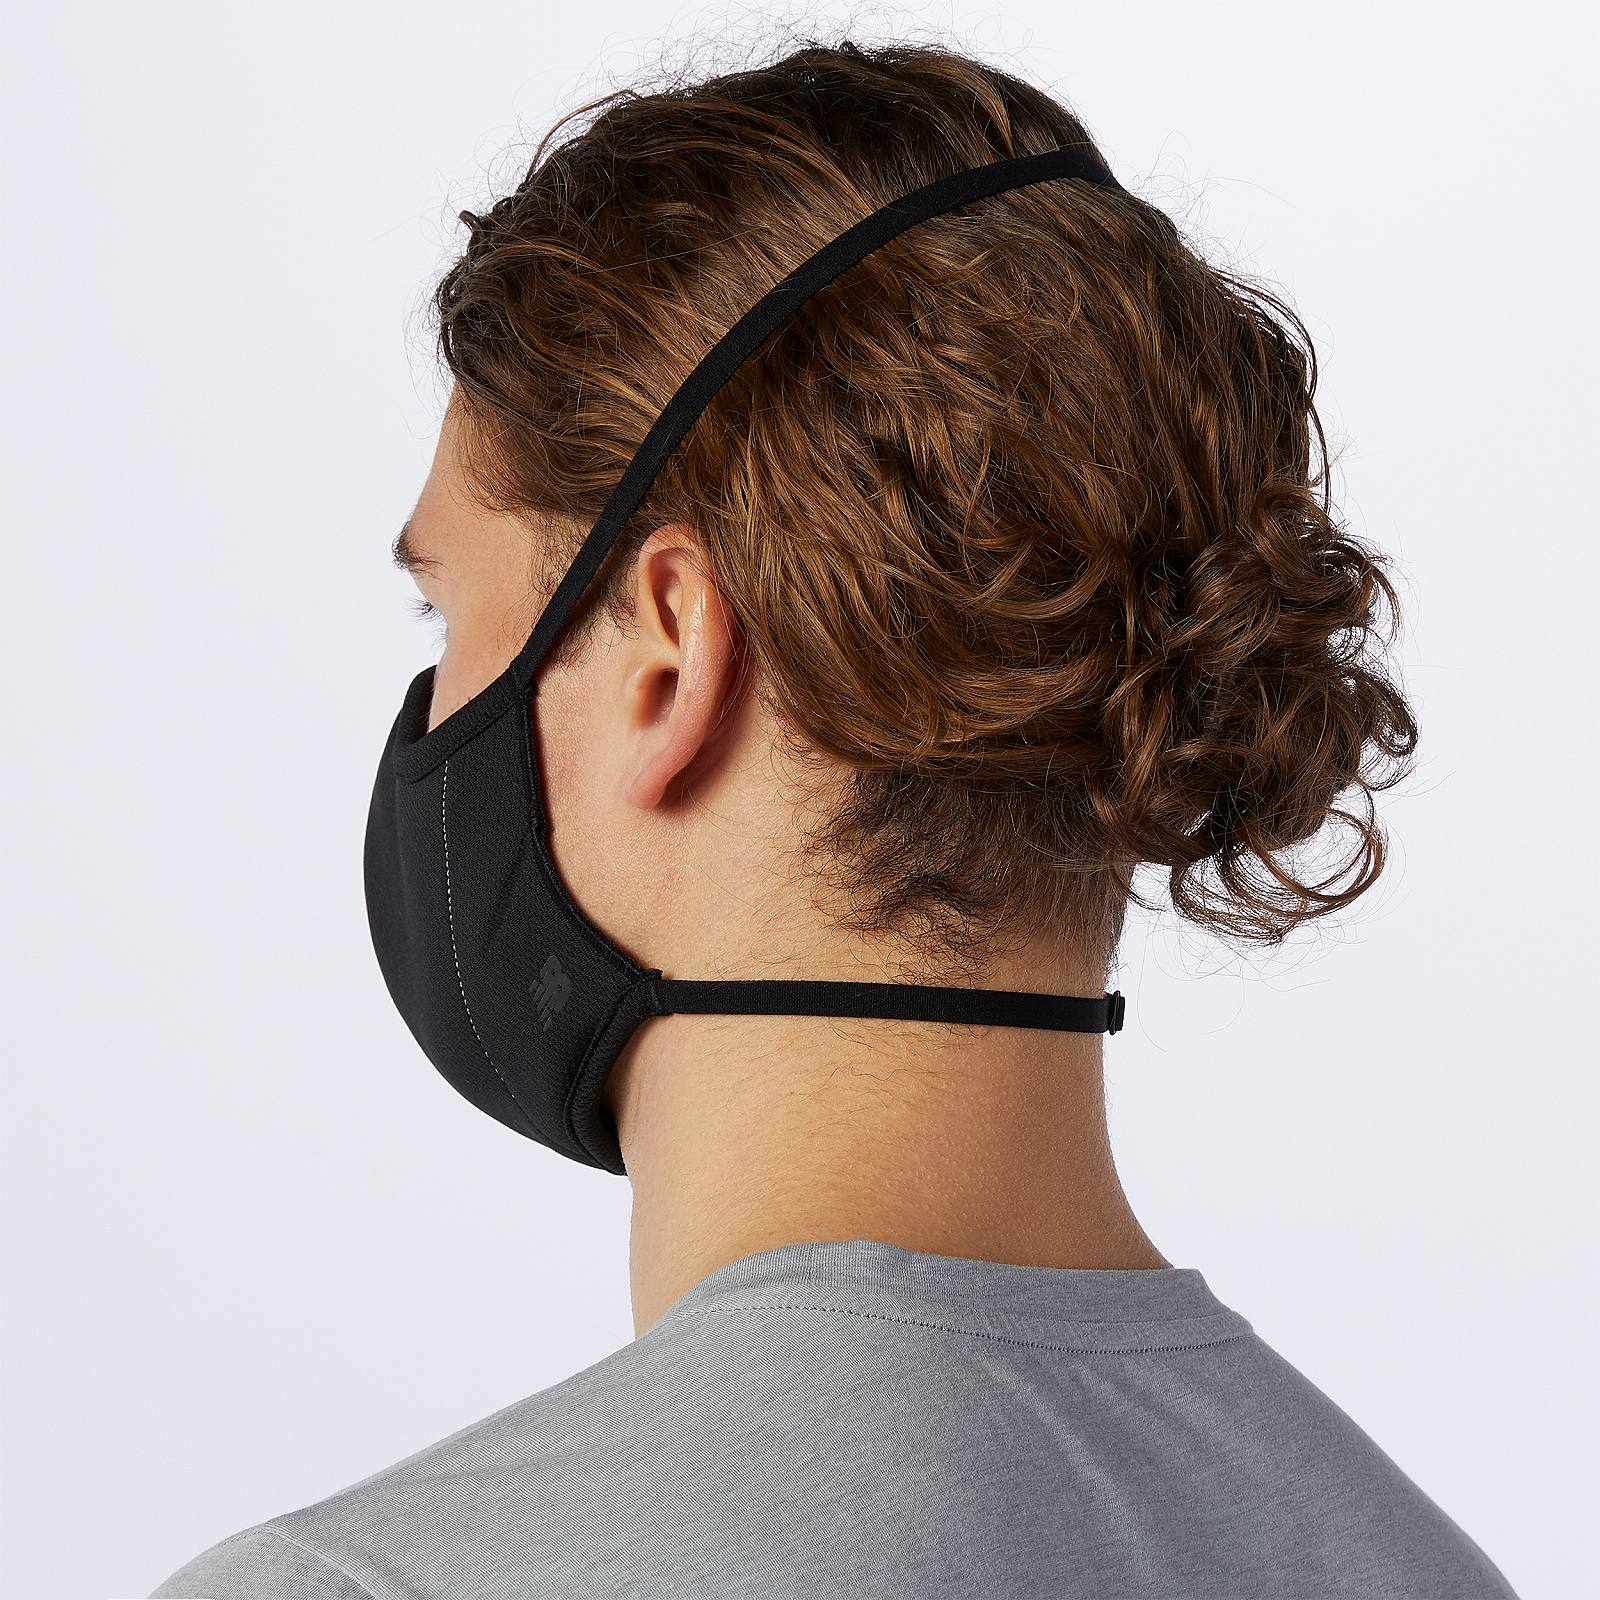 ACTIVE PERFORMANCE MASK